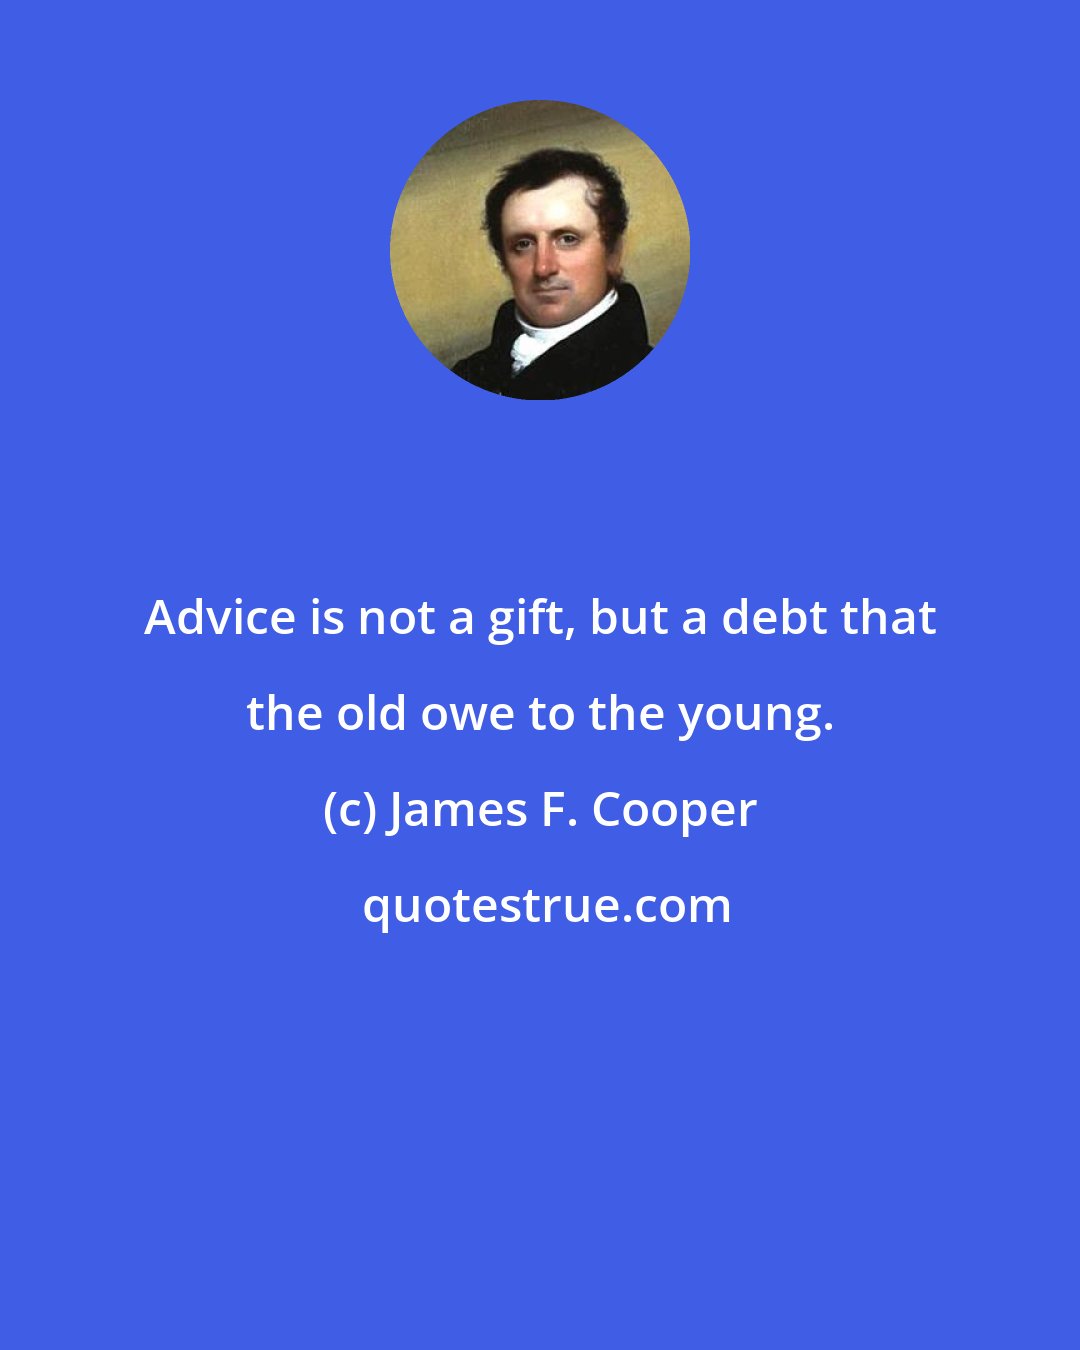 James F. Cooper: Advice is not a gift, but a debt that the old owe to the young.